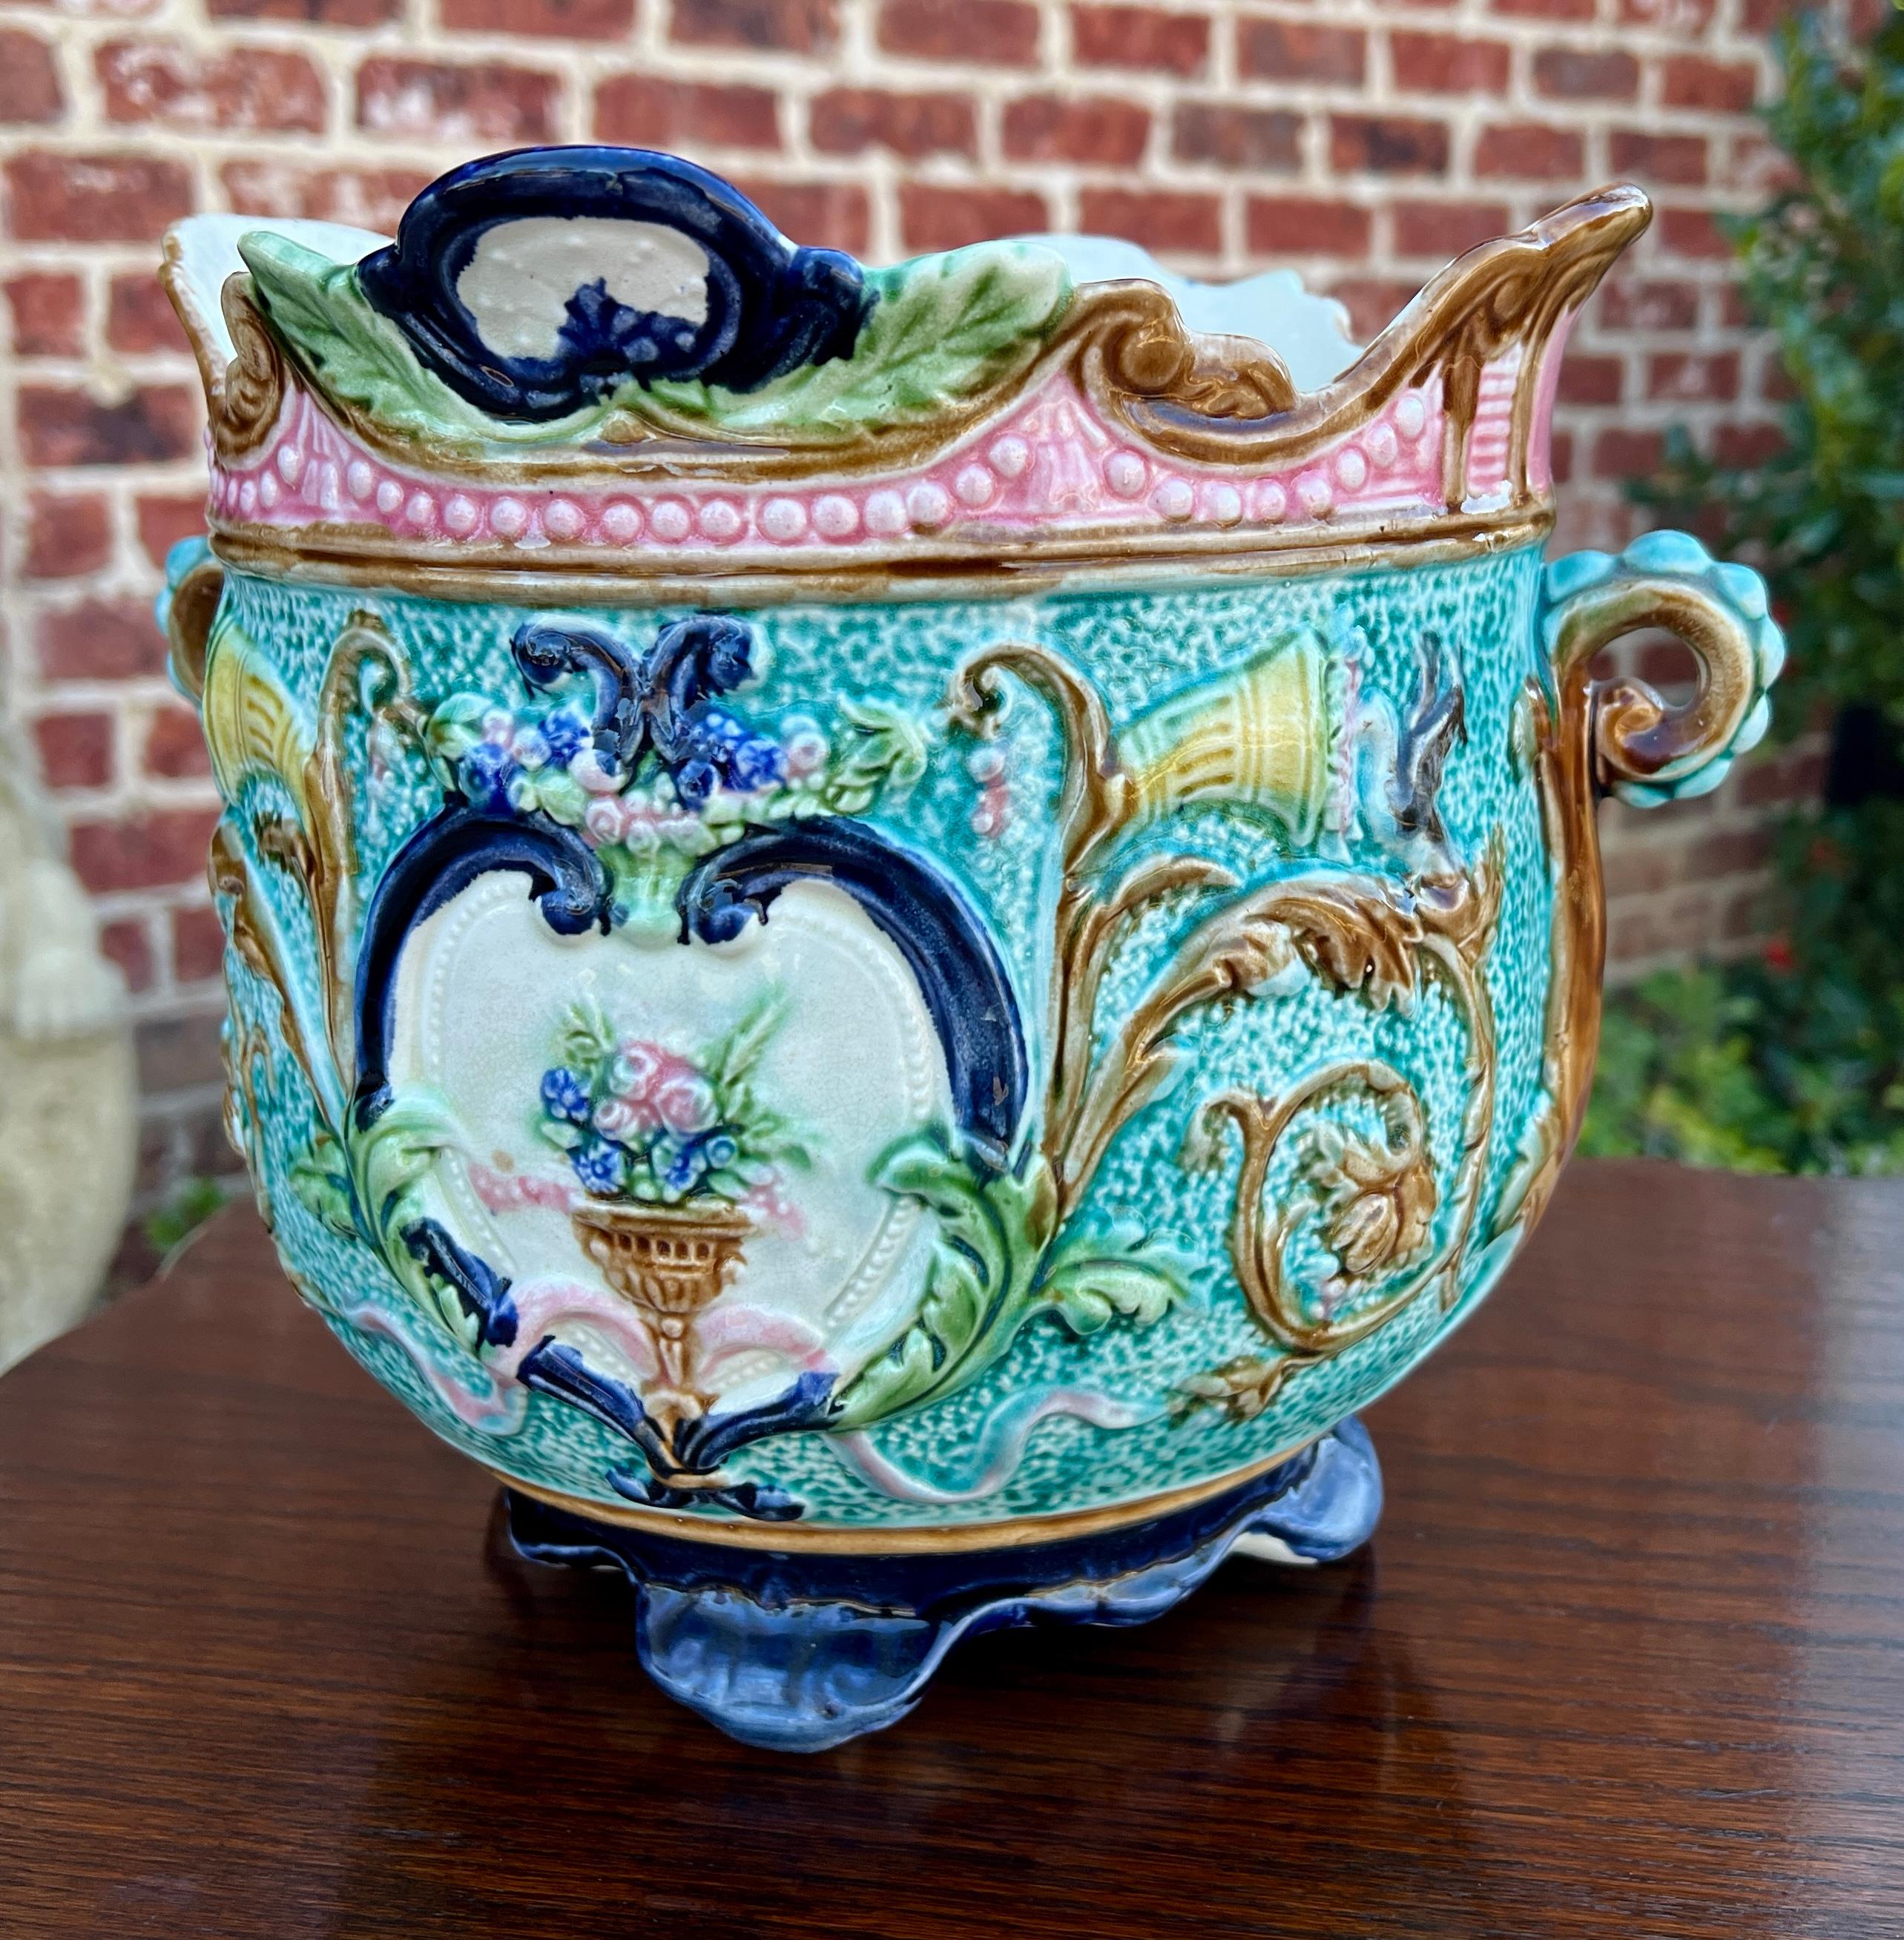 STUNNING ~~Antique French Onnaing Majolica Cache Pot, Planter, Jardiniere, Flower Pot, Bowl or Vase with Floral Design and Urn~~c. 1890s

Authentic French majolica planter or cache pot~~vibrant colors of deep blue, turquoise, pink, green, yellow and